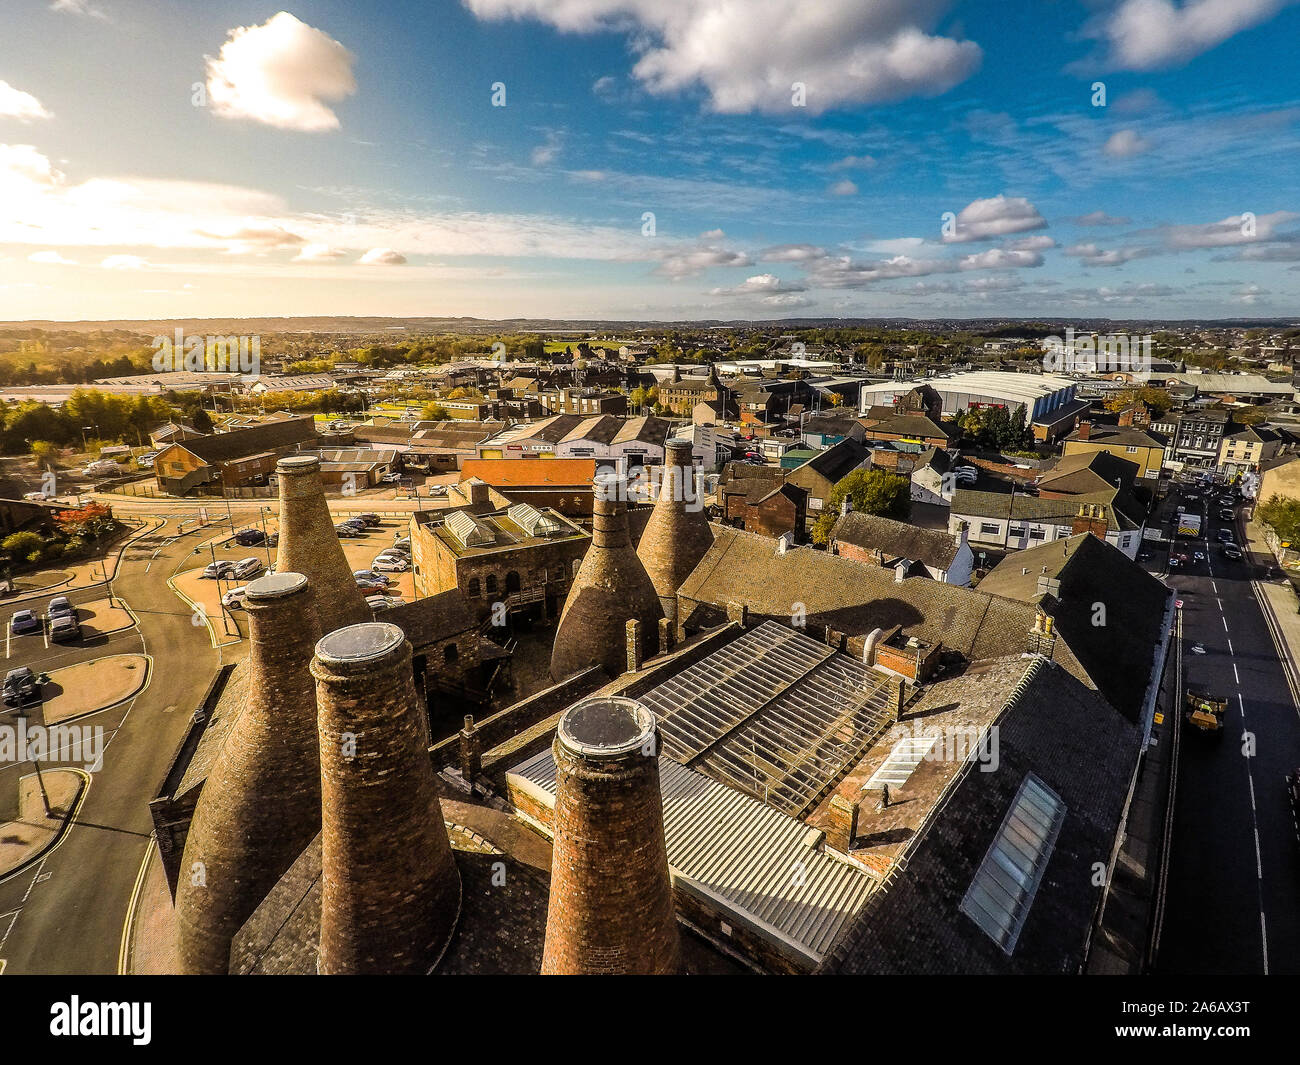 Aerial view of the famous bottle kilns at Gladstone Pottery Museum in Stoke on Trent, Pottery manufacturing, 30+ images available Stock Photo